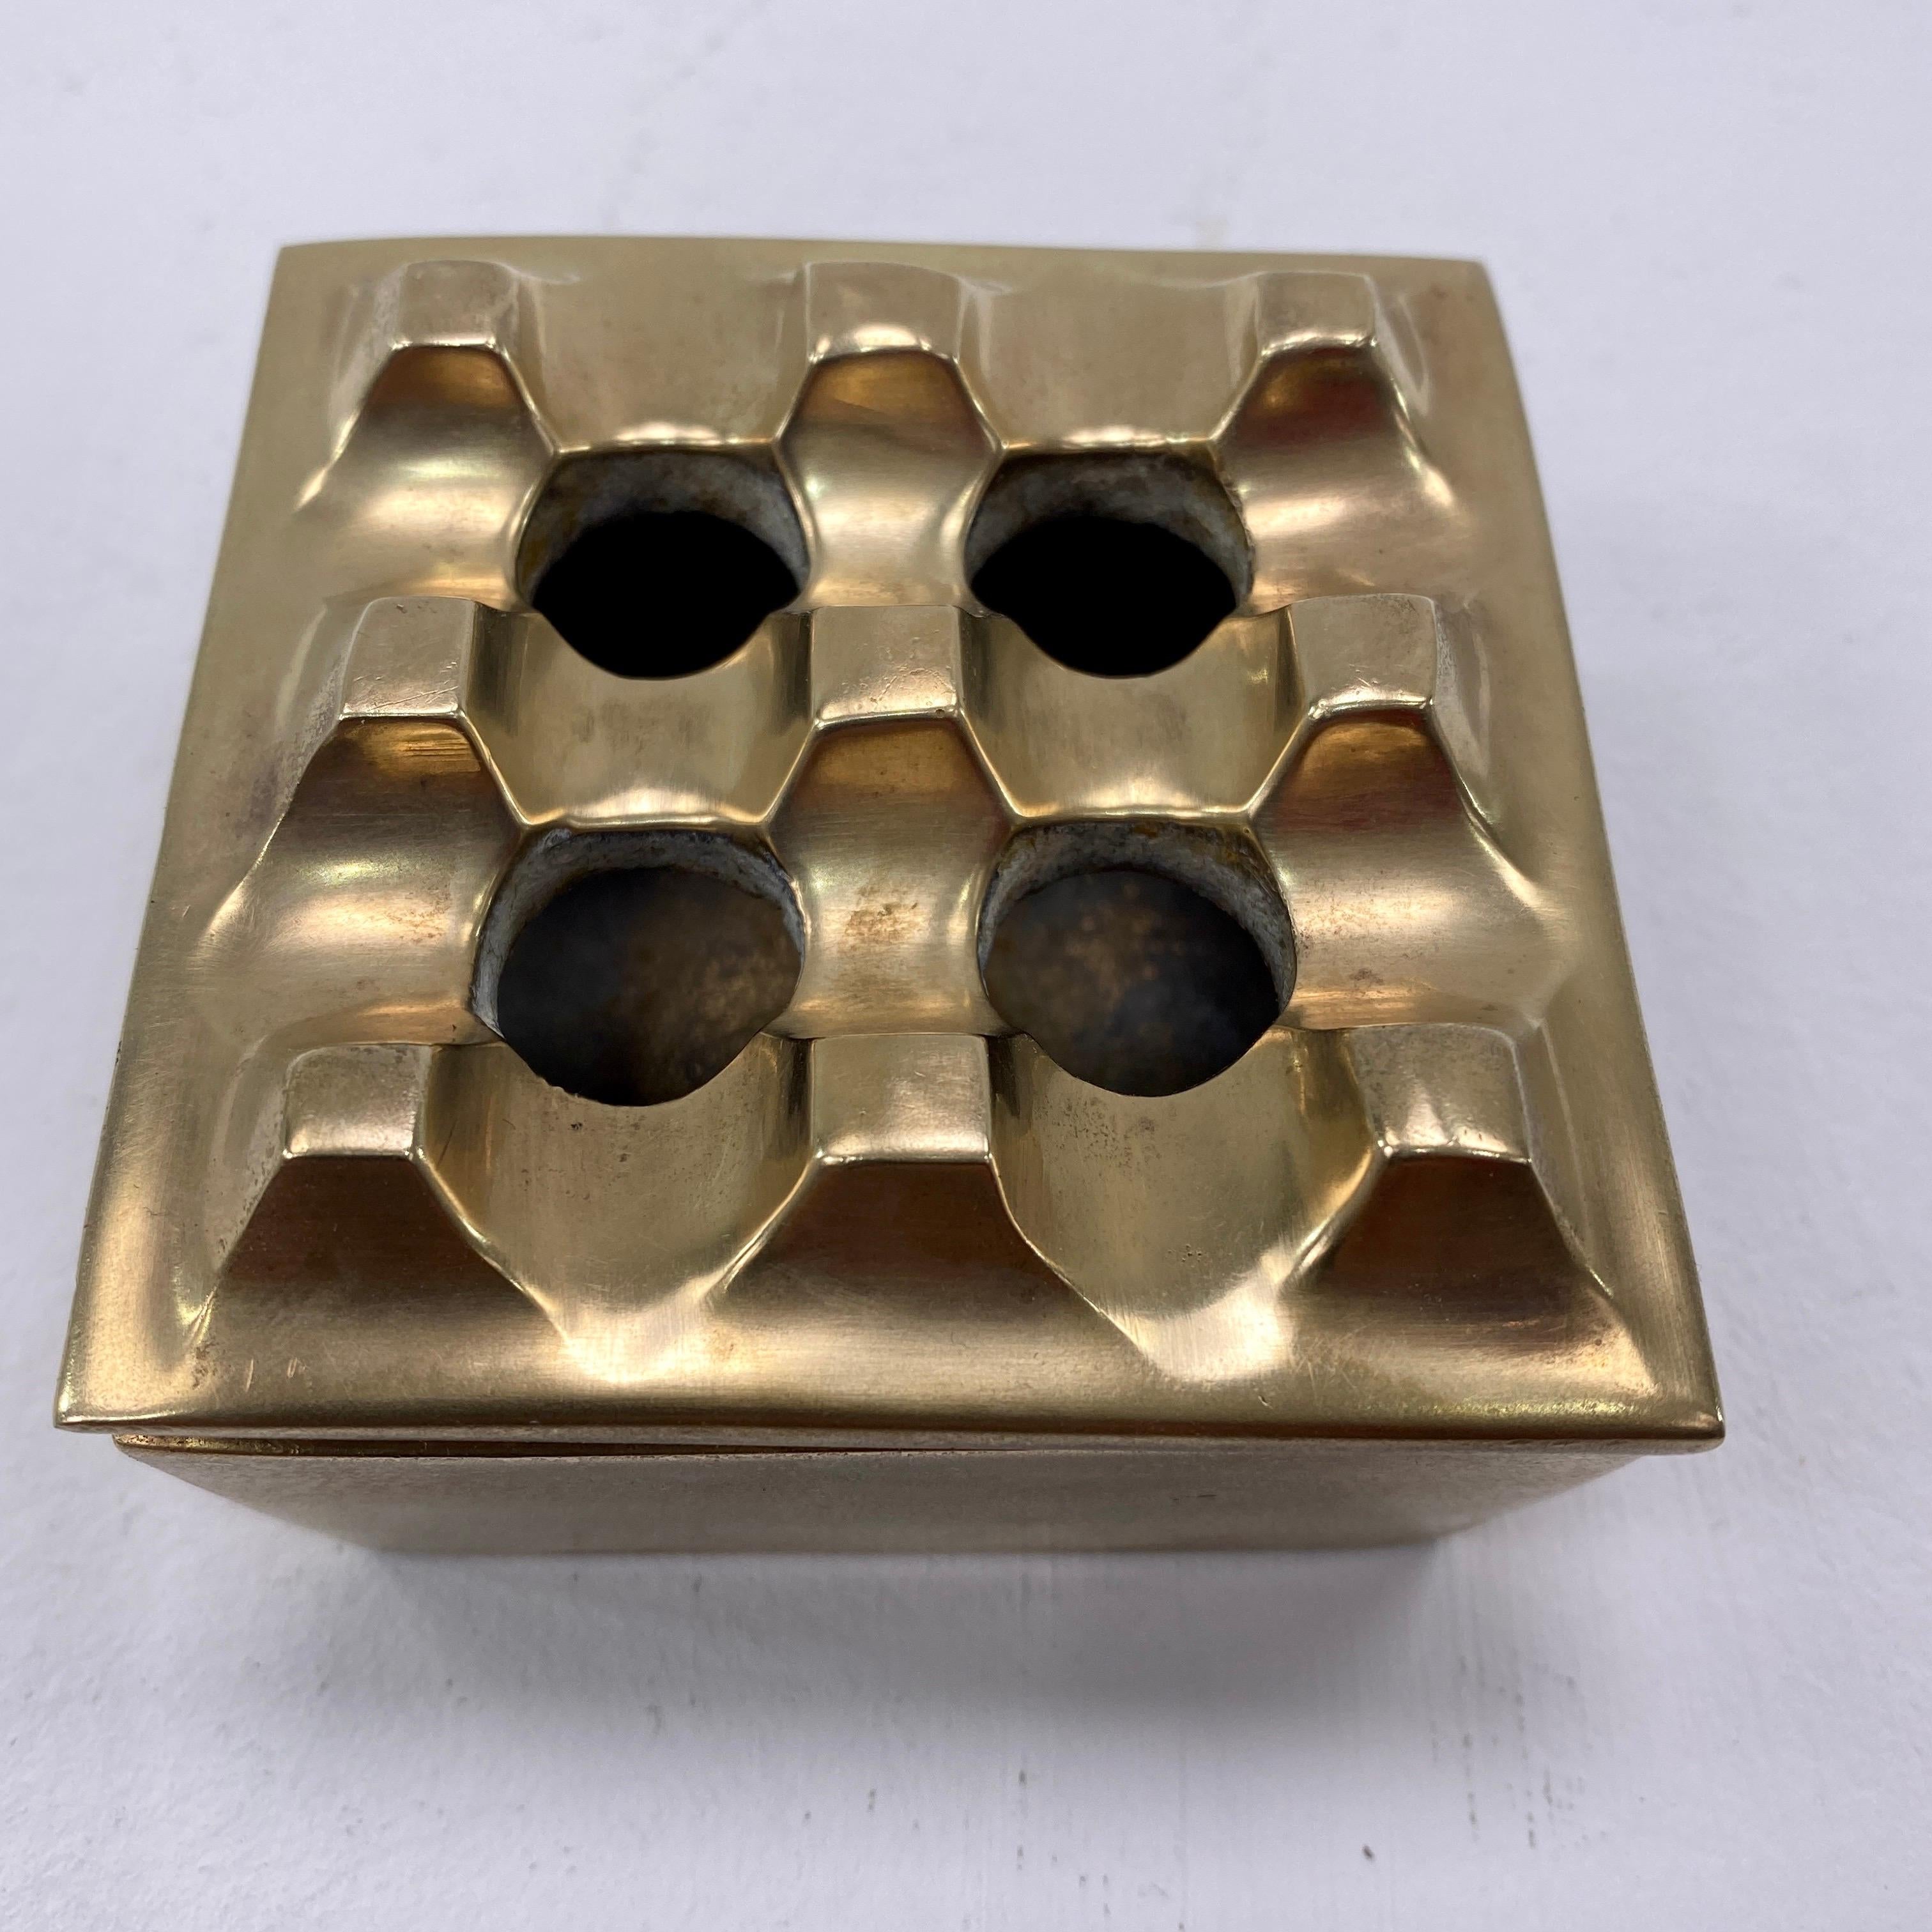 This ashtray is in solid brass. The Artists are Beck and young. It has been done in Sweden in the 1970's.